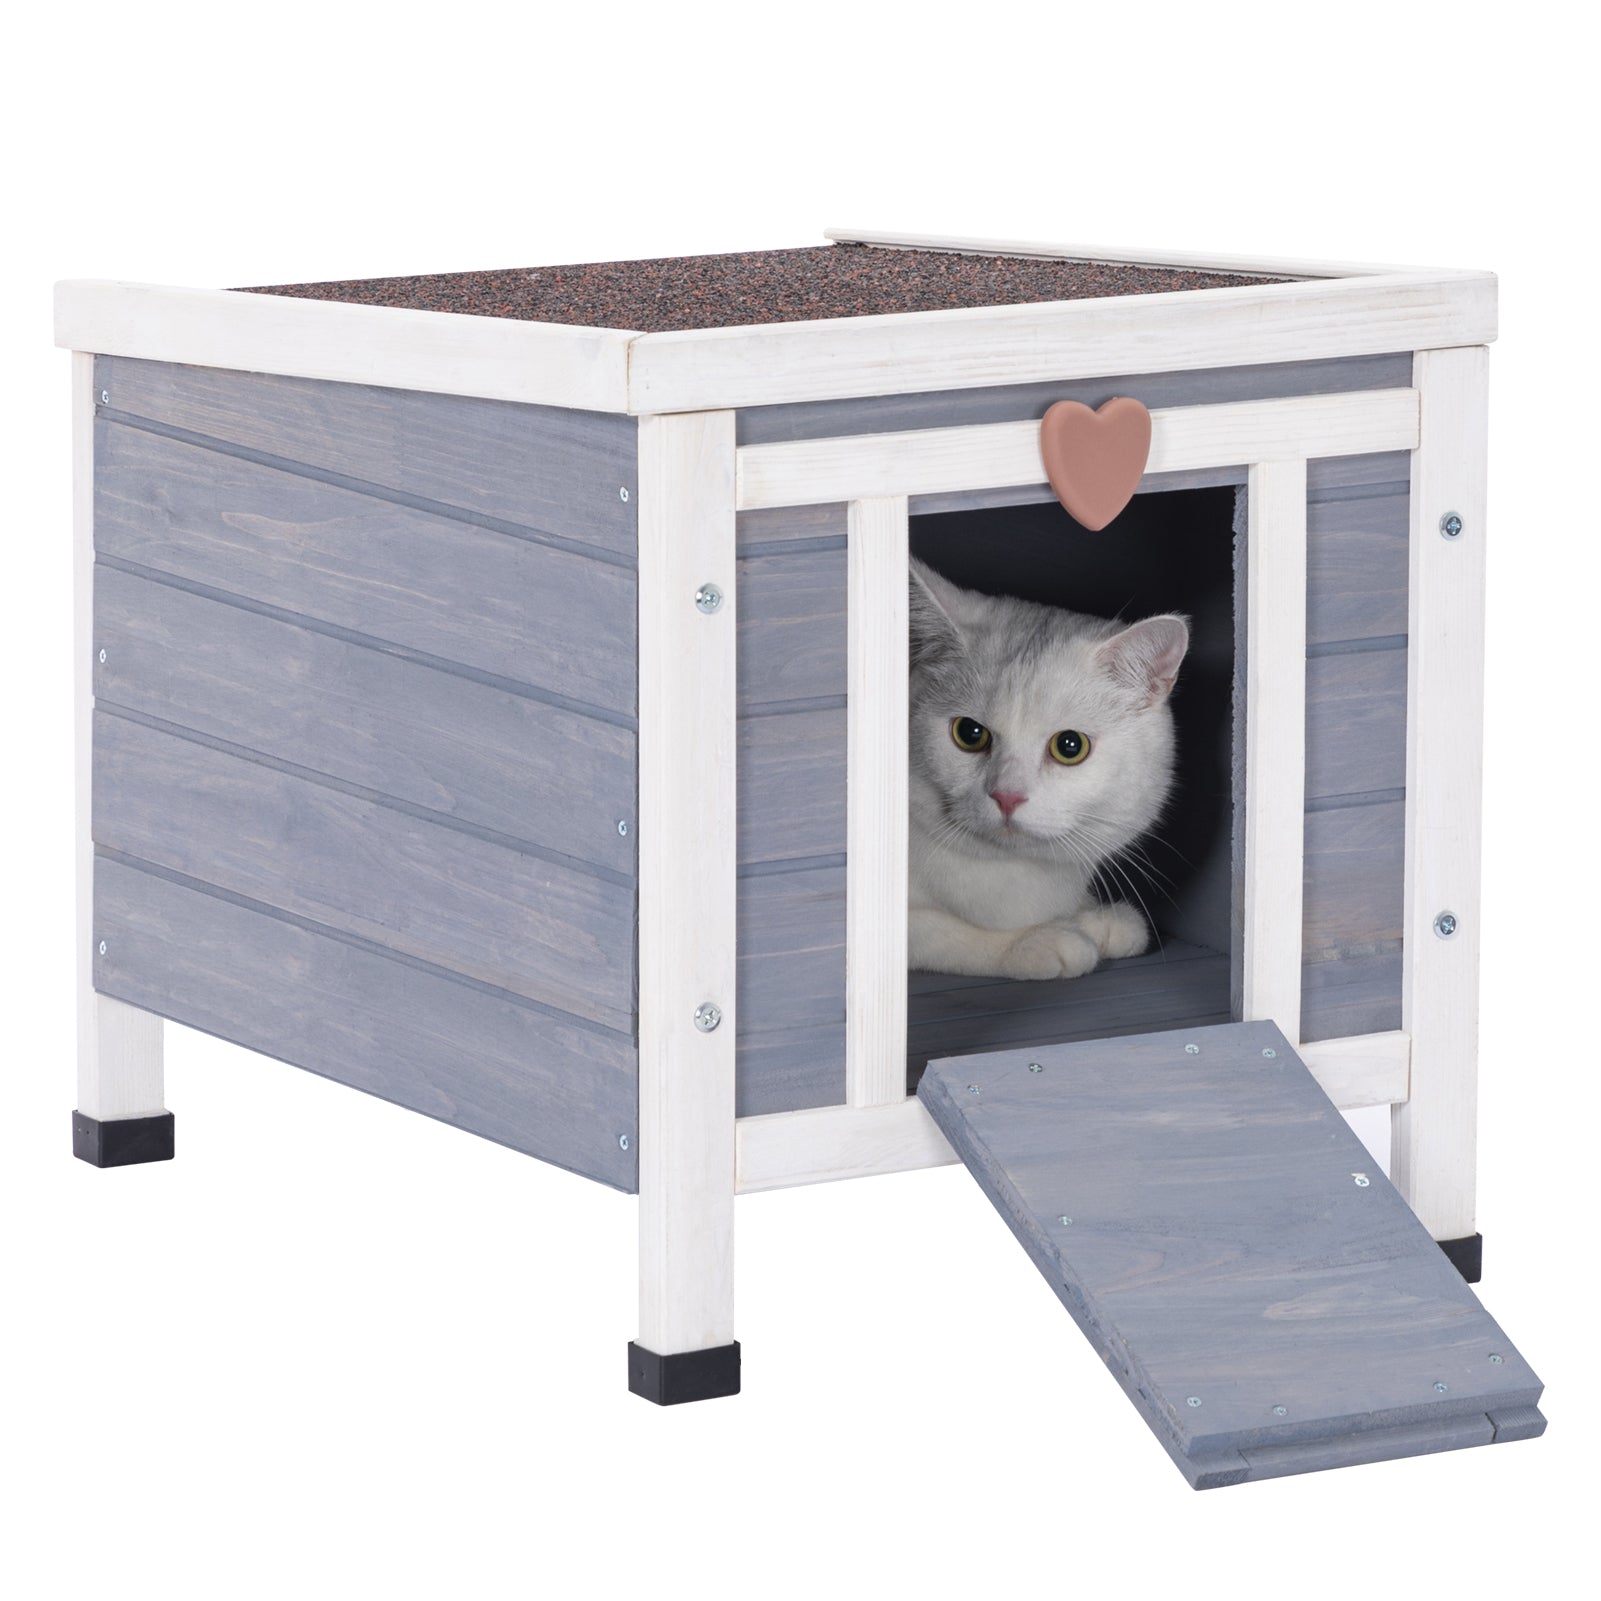 Outdoor-Cat-House-Higher-Feet-to-Against-Rain-and-Snow-03